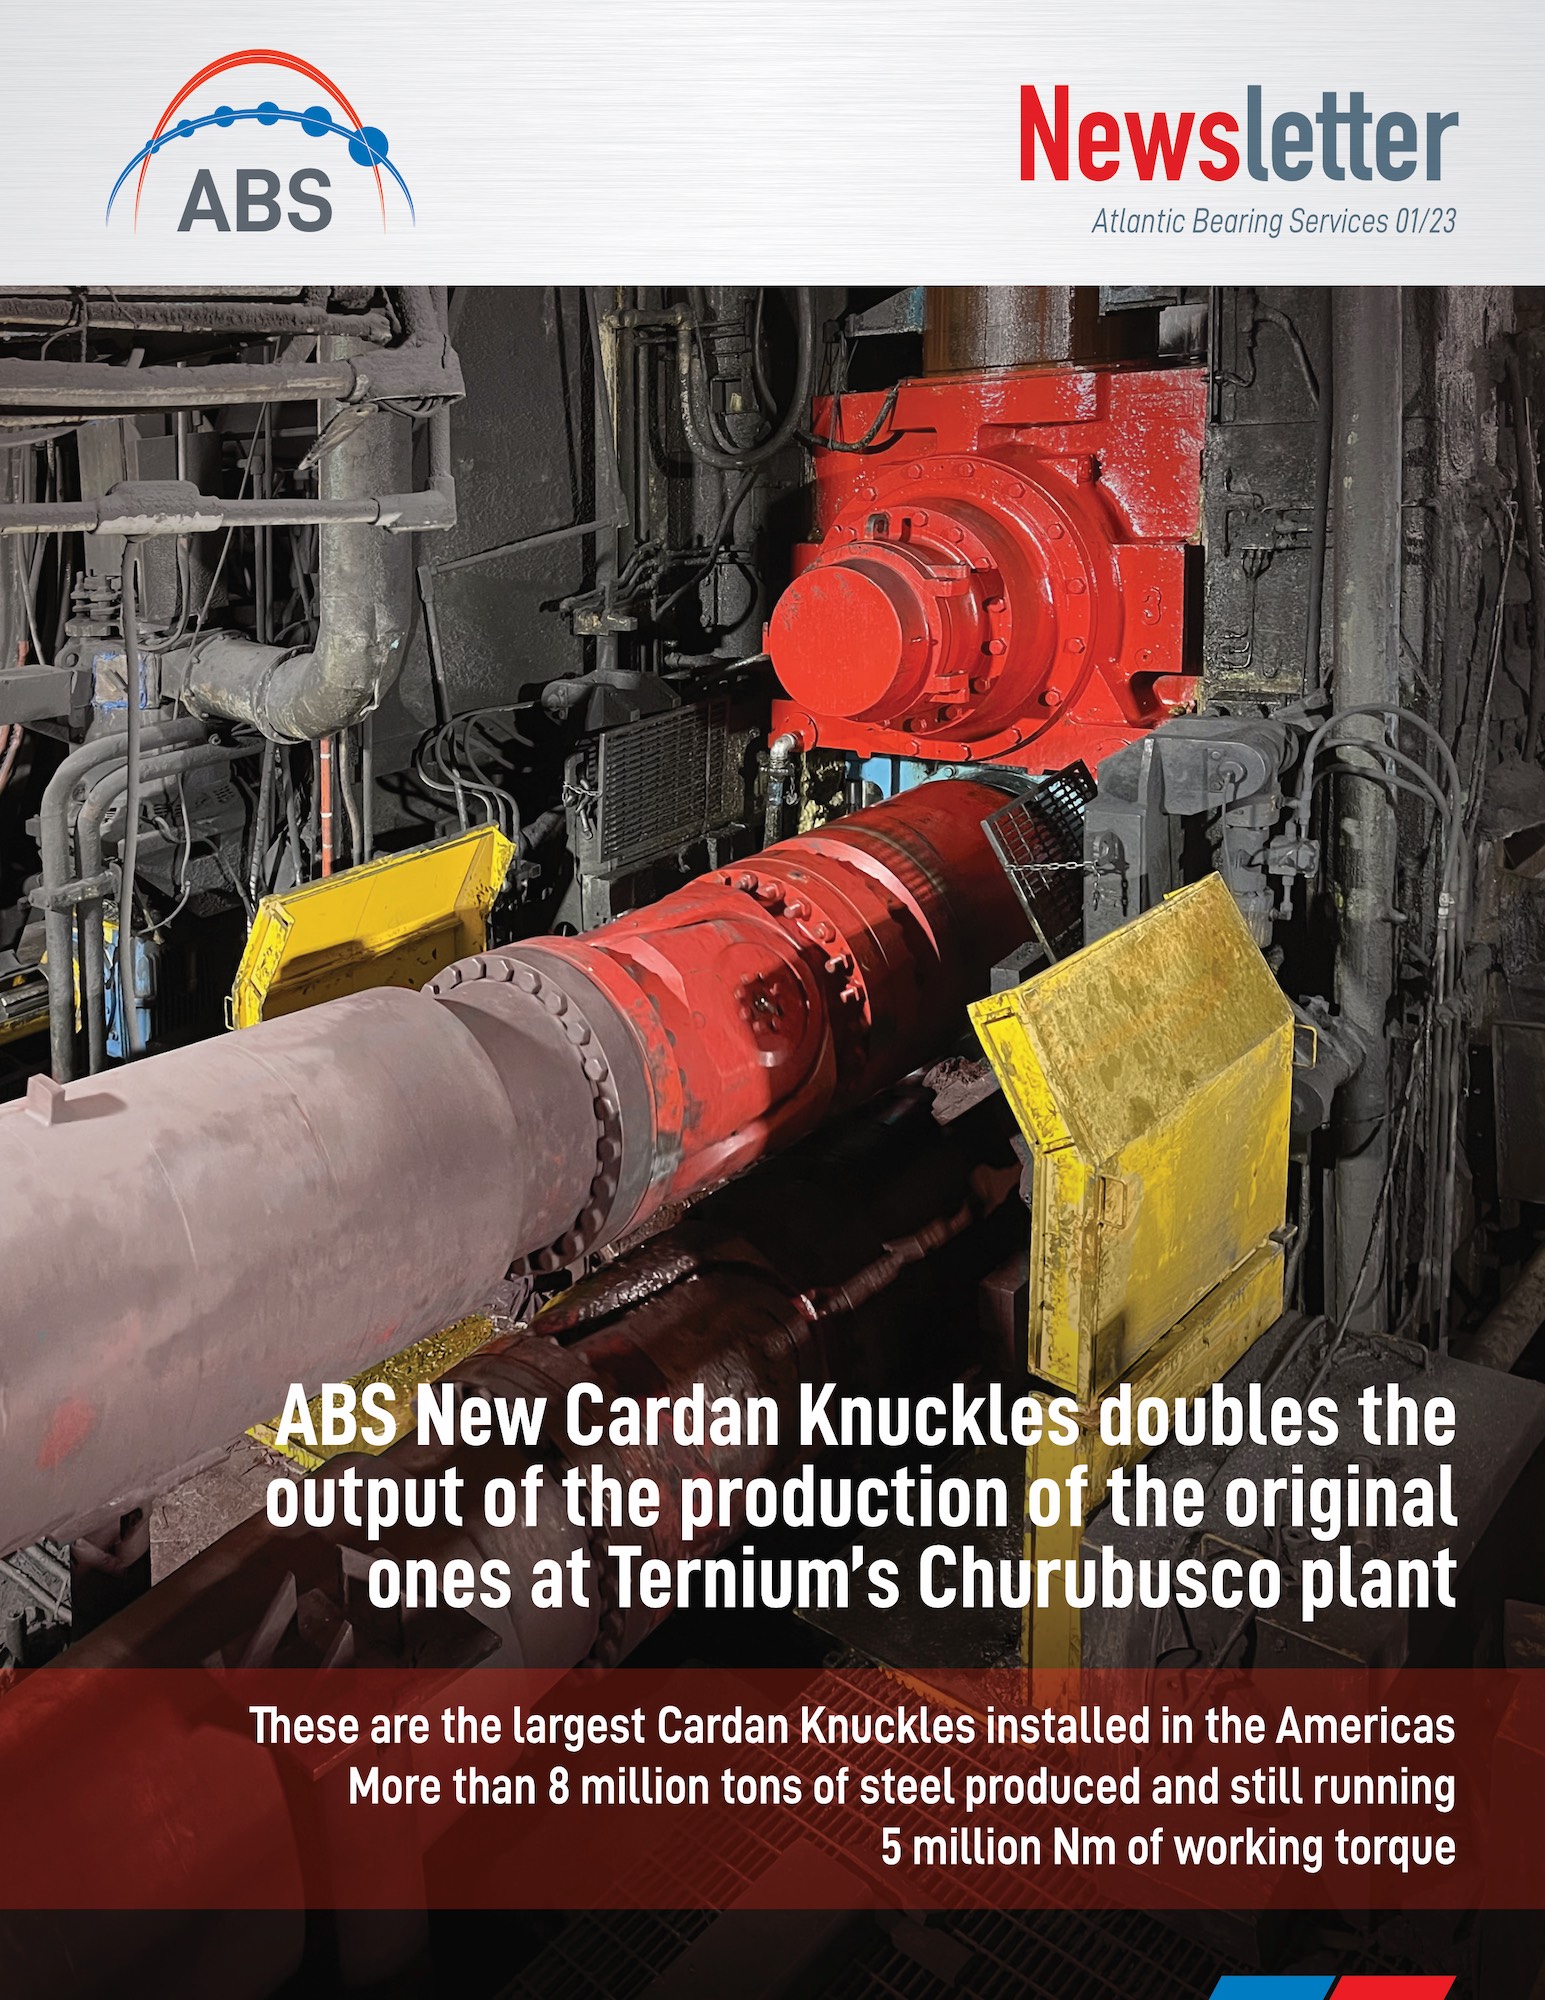 ABS New Cardan Knuckles doubles the output of the production of the original ones at Ternium’s Churubusco plant